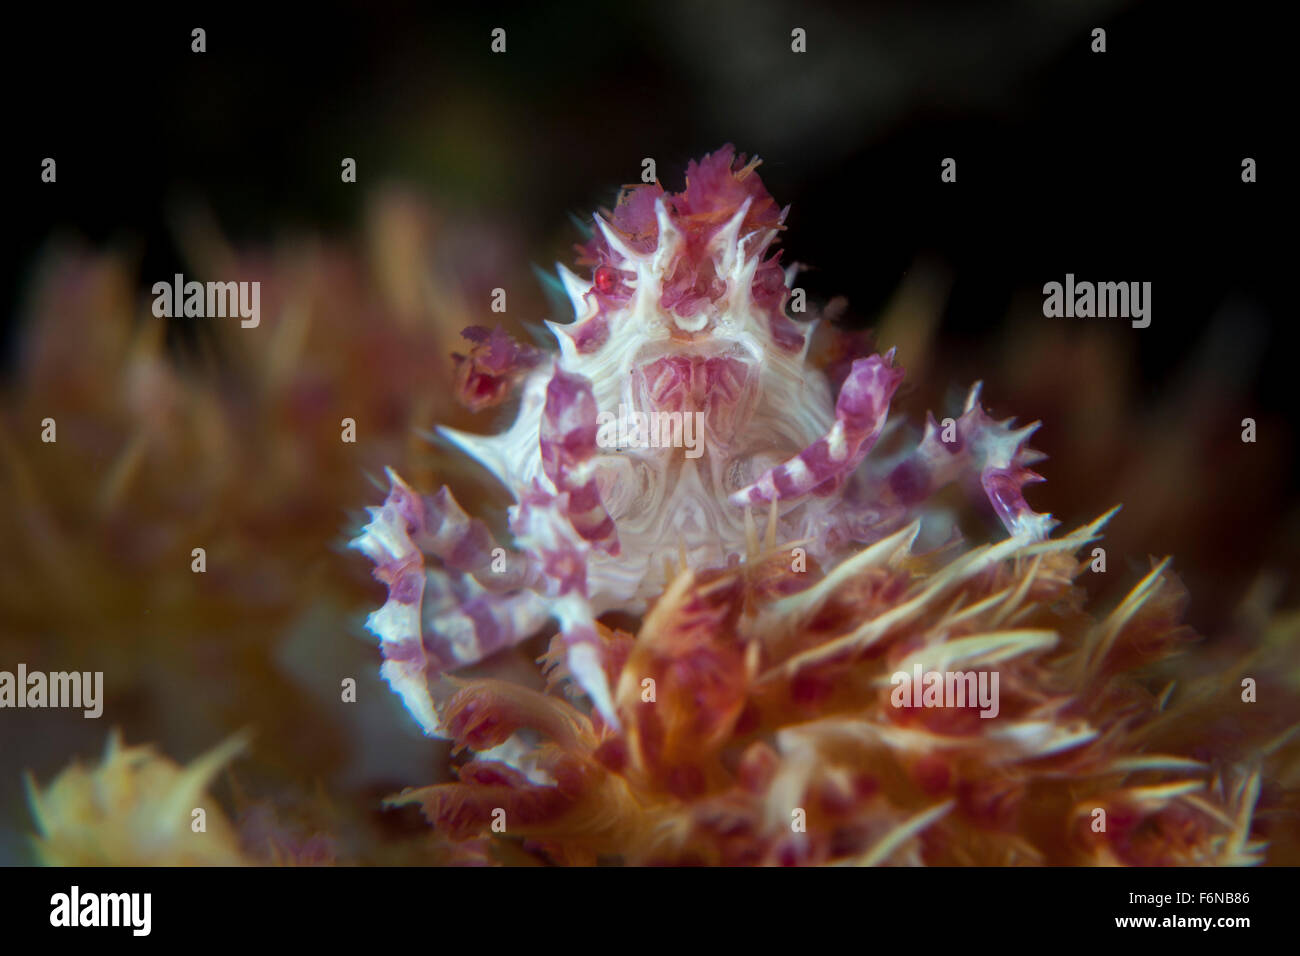 A soft coral crab (Hoplophrys oatesii) clings to its host soft coral on a reef in Lembeh Strait, Indonesia. This area is known f Stock Photo